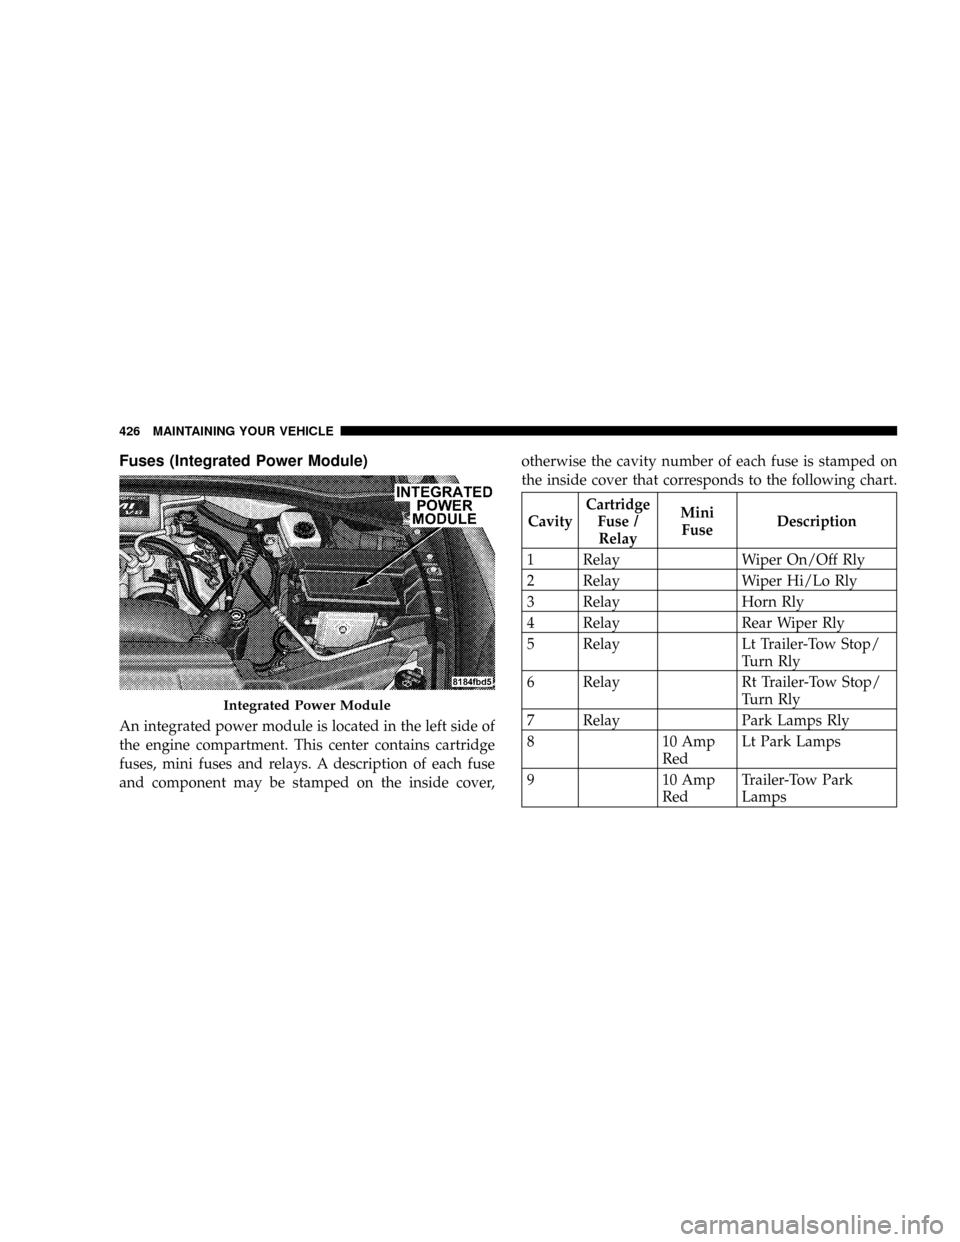 CHRYSLER ASPEN 2008 2.G Owners Manual Fuses (Integrated Power Module)
An integrated power module is located in the left side of
the engine compartment. This center contains cartridge
fuses, mini fuses and relays. A description of each fus